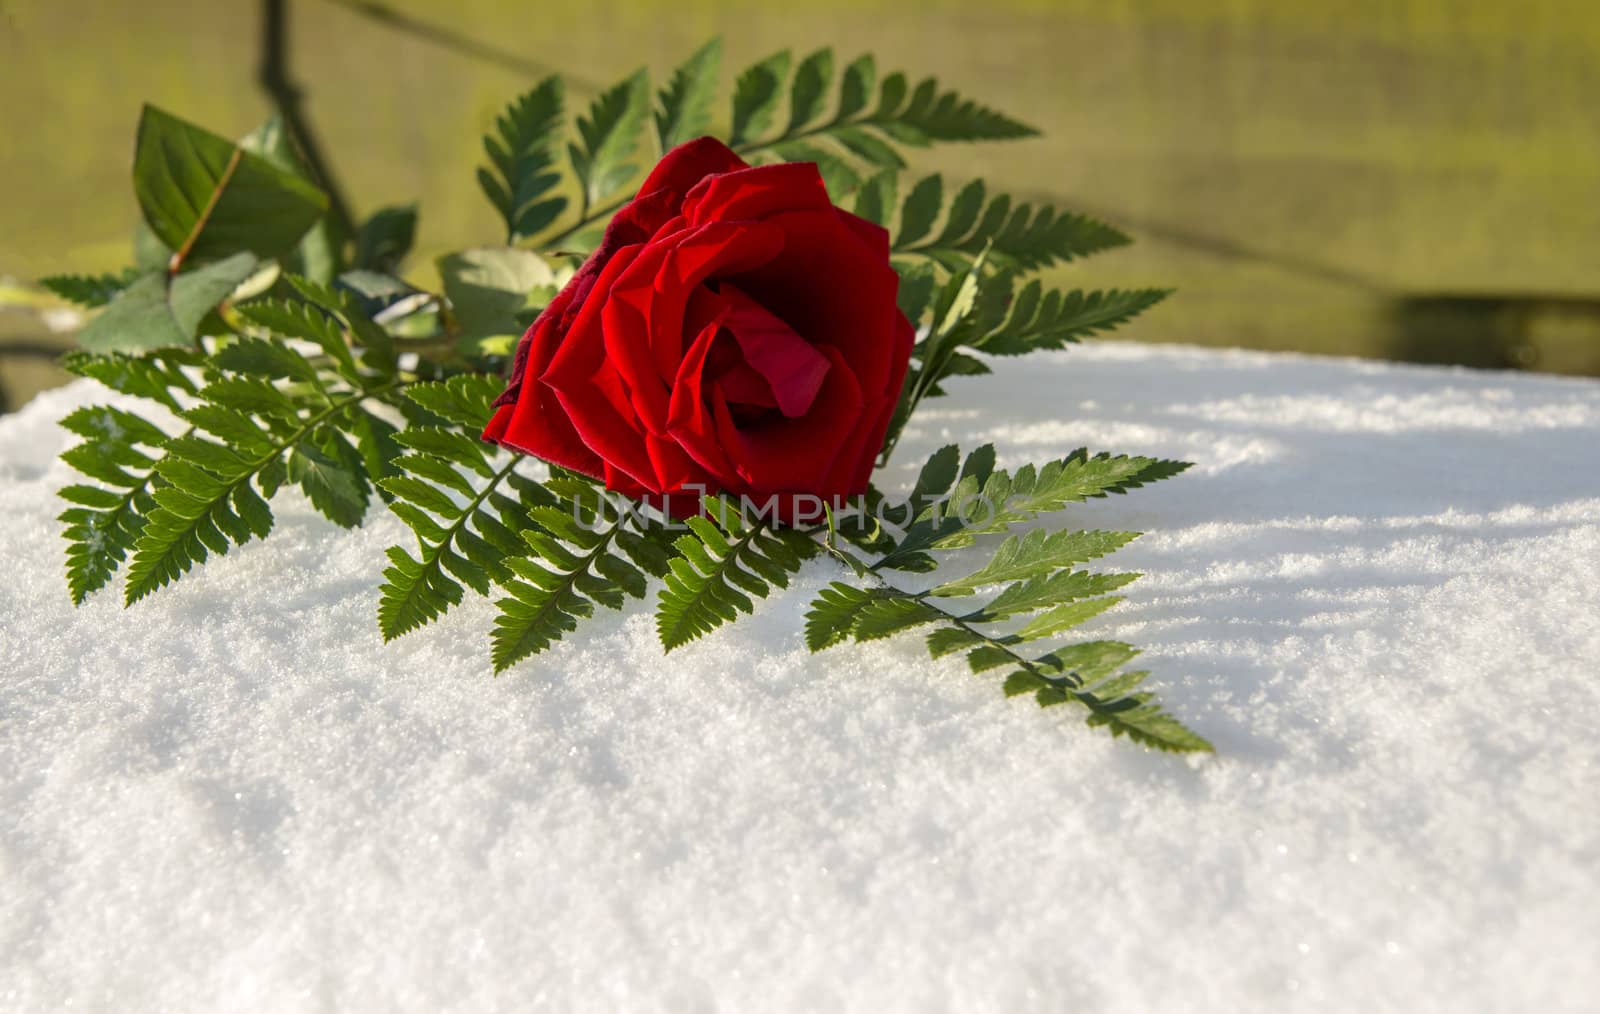 red rose i the snow in garden 